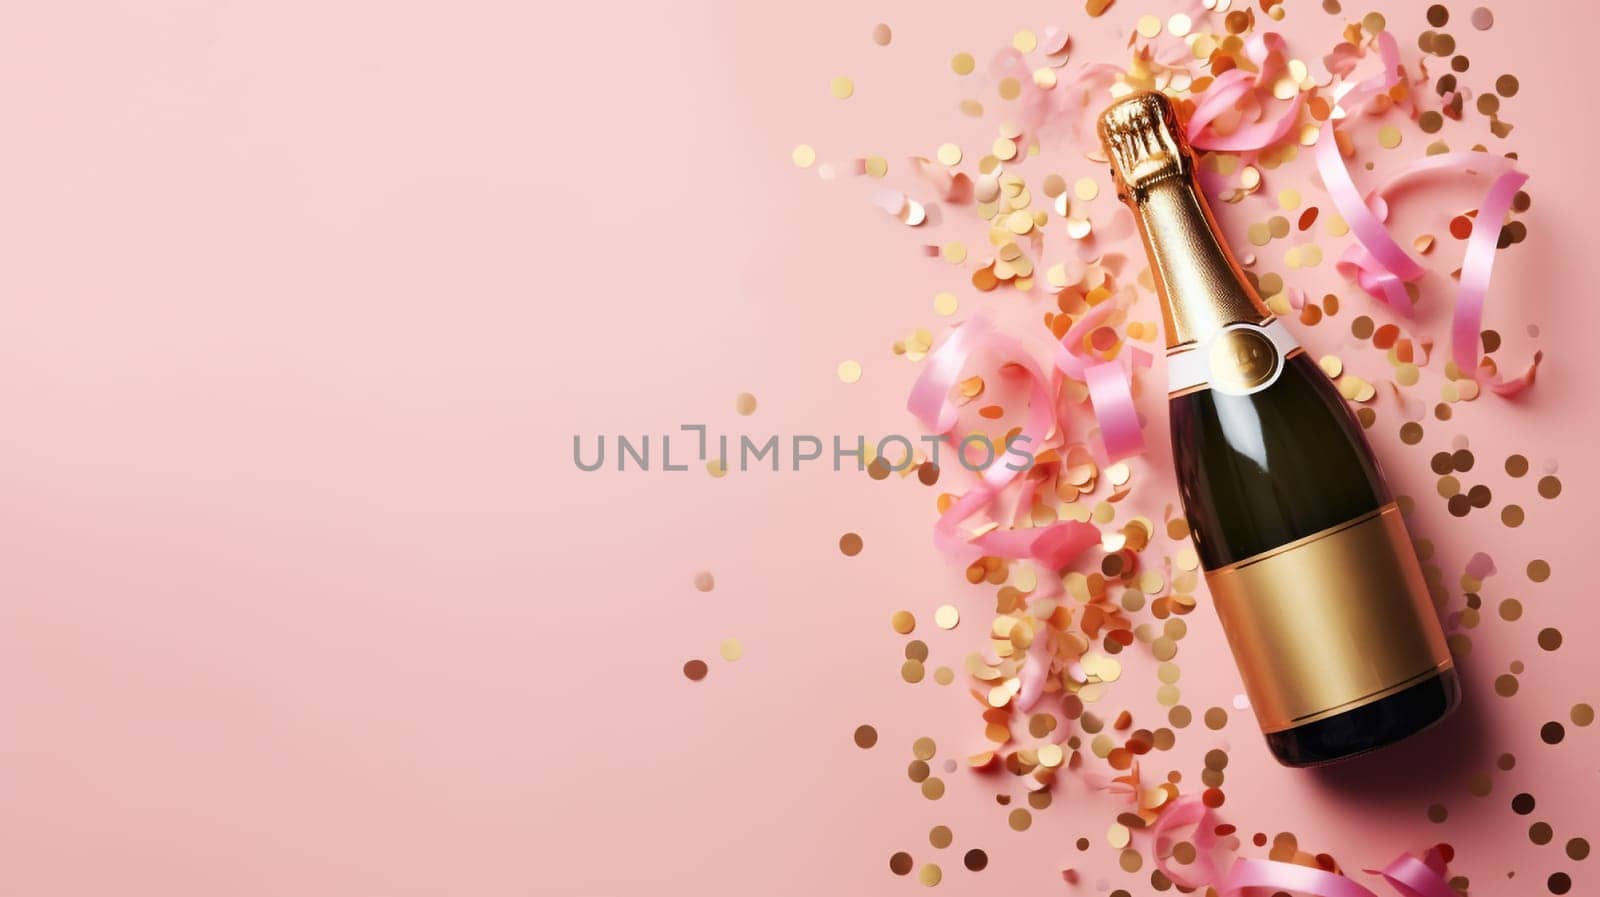 Top view of Champagne Bottle, Golden Confetti, and Decorative Balls on a Stylish light pink Background, Flat Lay Arrangement. with copy space